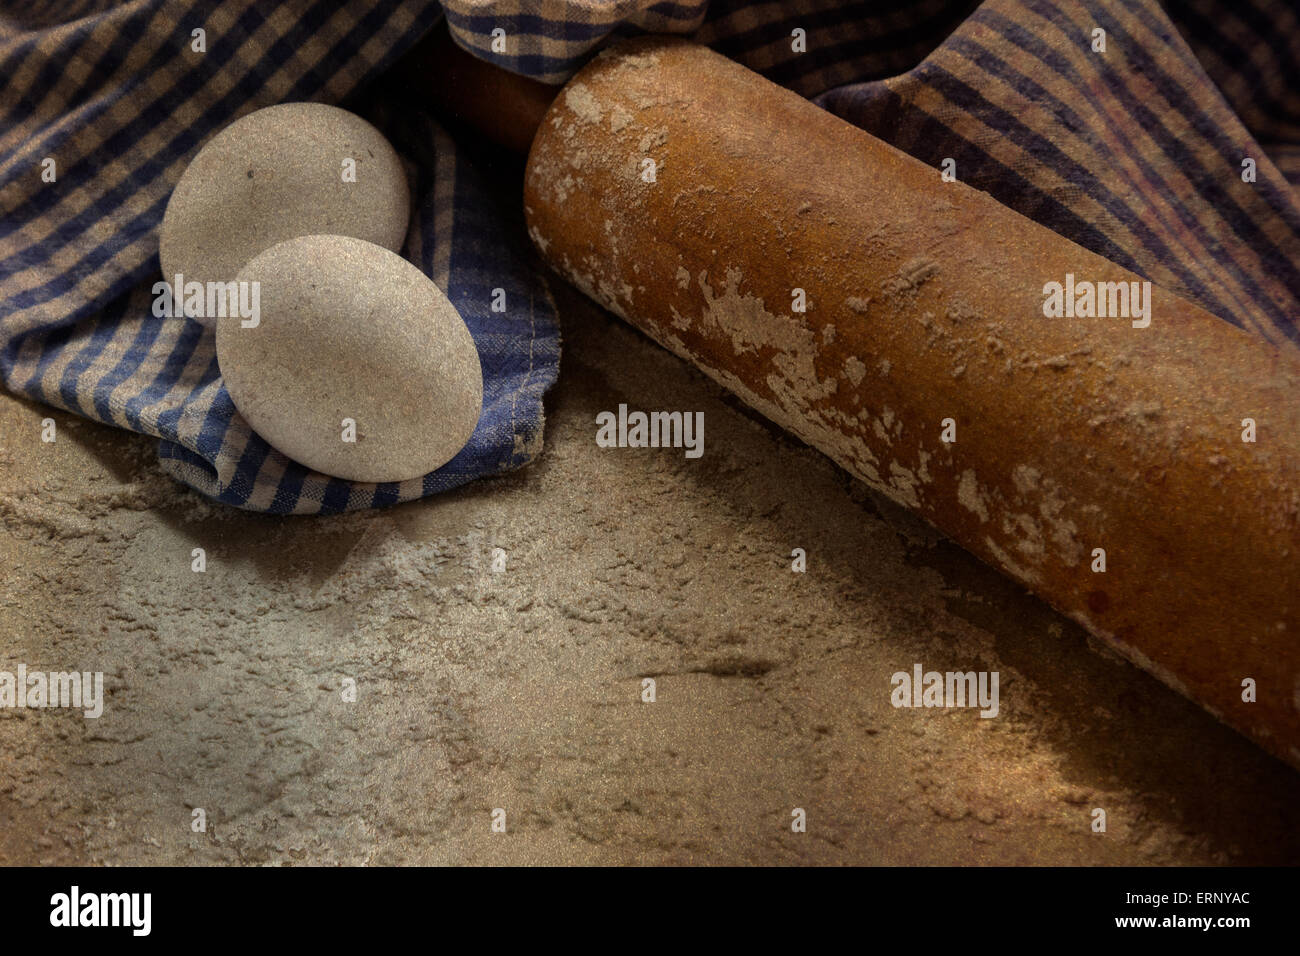 An antique rolling pin sits on a floured surface with two eggs and a checkered blue and white towel. Stock Photo